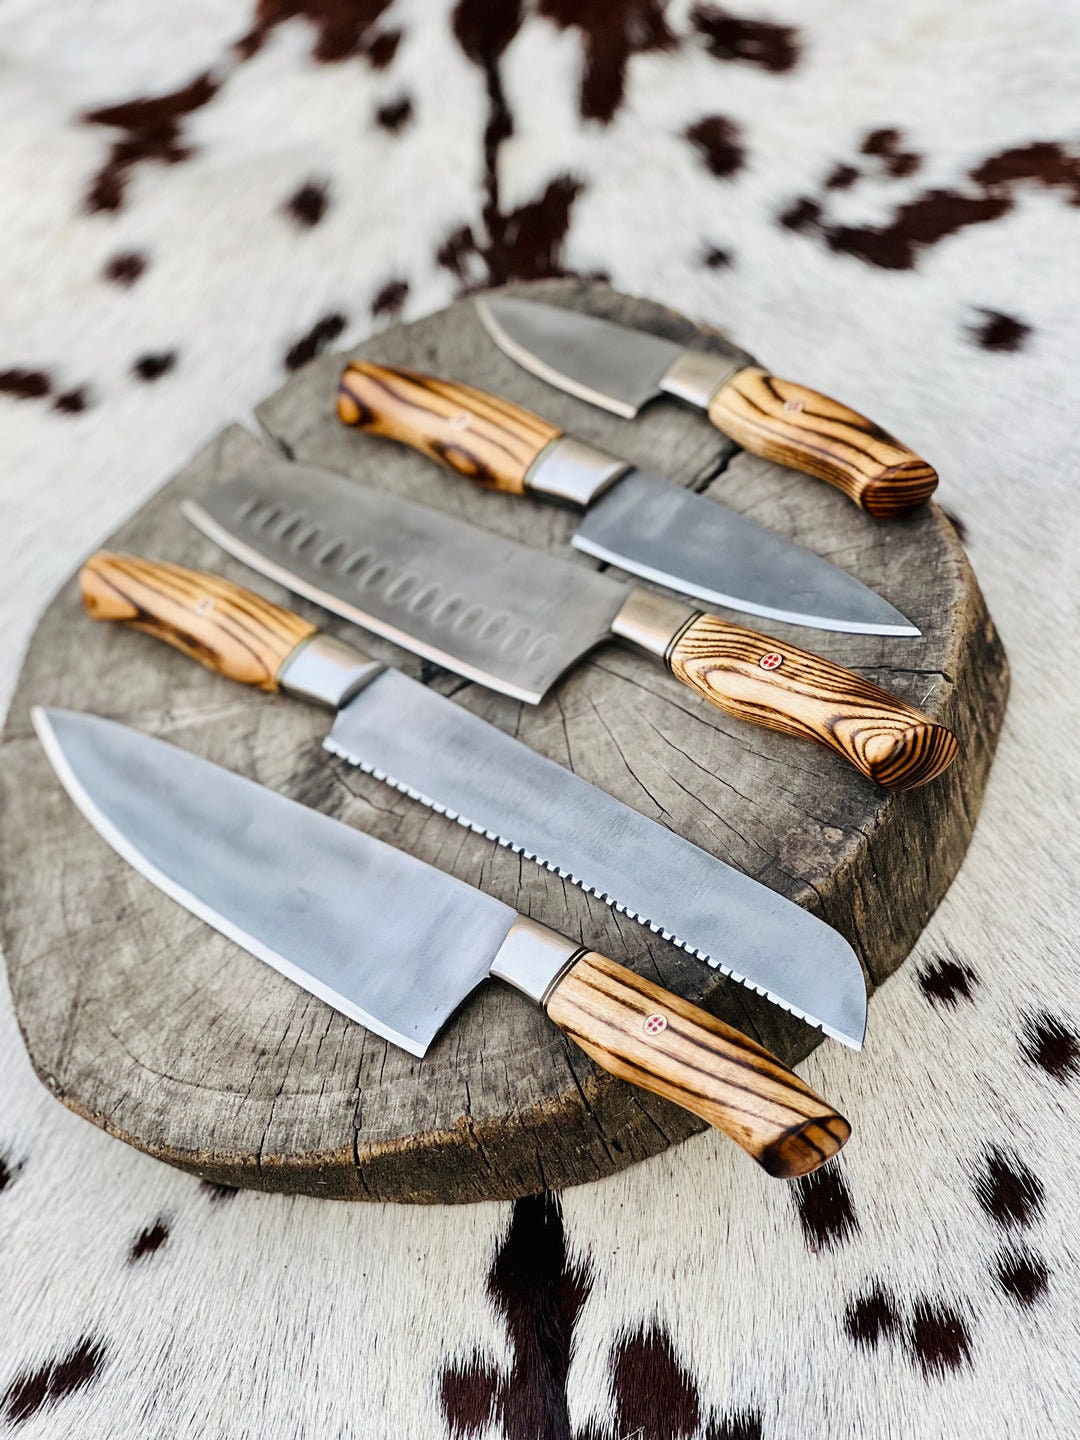 50 Stainless Steel Bow Knife, Bread Knife Blades, With Stainless Steel  Screws and Pattern for Wood Handle. USA NO COVERS 